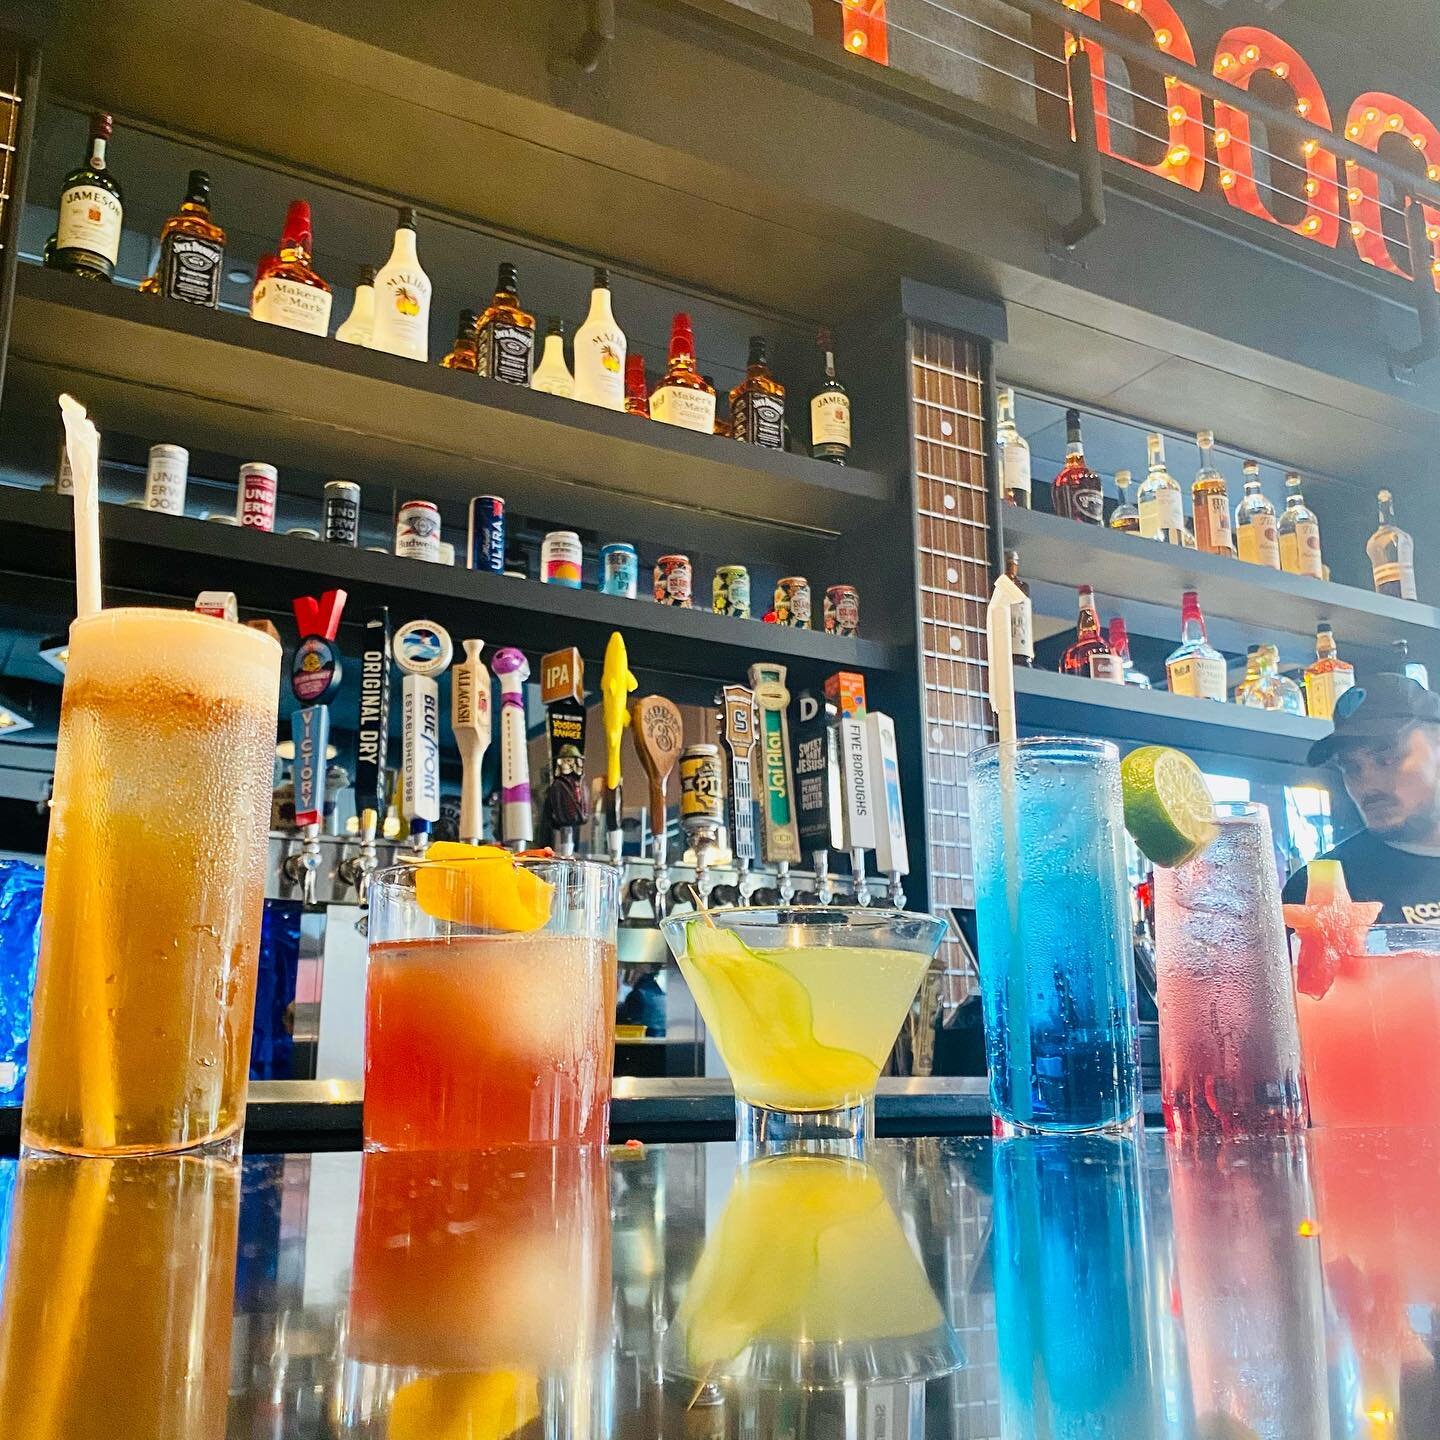 Eeny, meeny, miny, moe... it&rsquo;s a lovely day for Sunday brunch at Rock City Dogs. We are open 11-7 today. Would love to have you come down and rock with us. 
..
..
..
#RCD #rockcitydogs #eat #drink #rock #cocktails #mimosa #bloodymary #casamigos